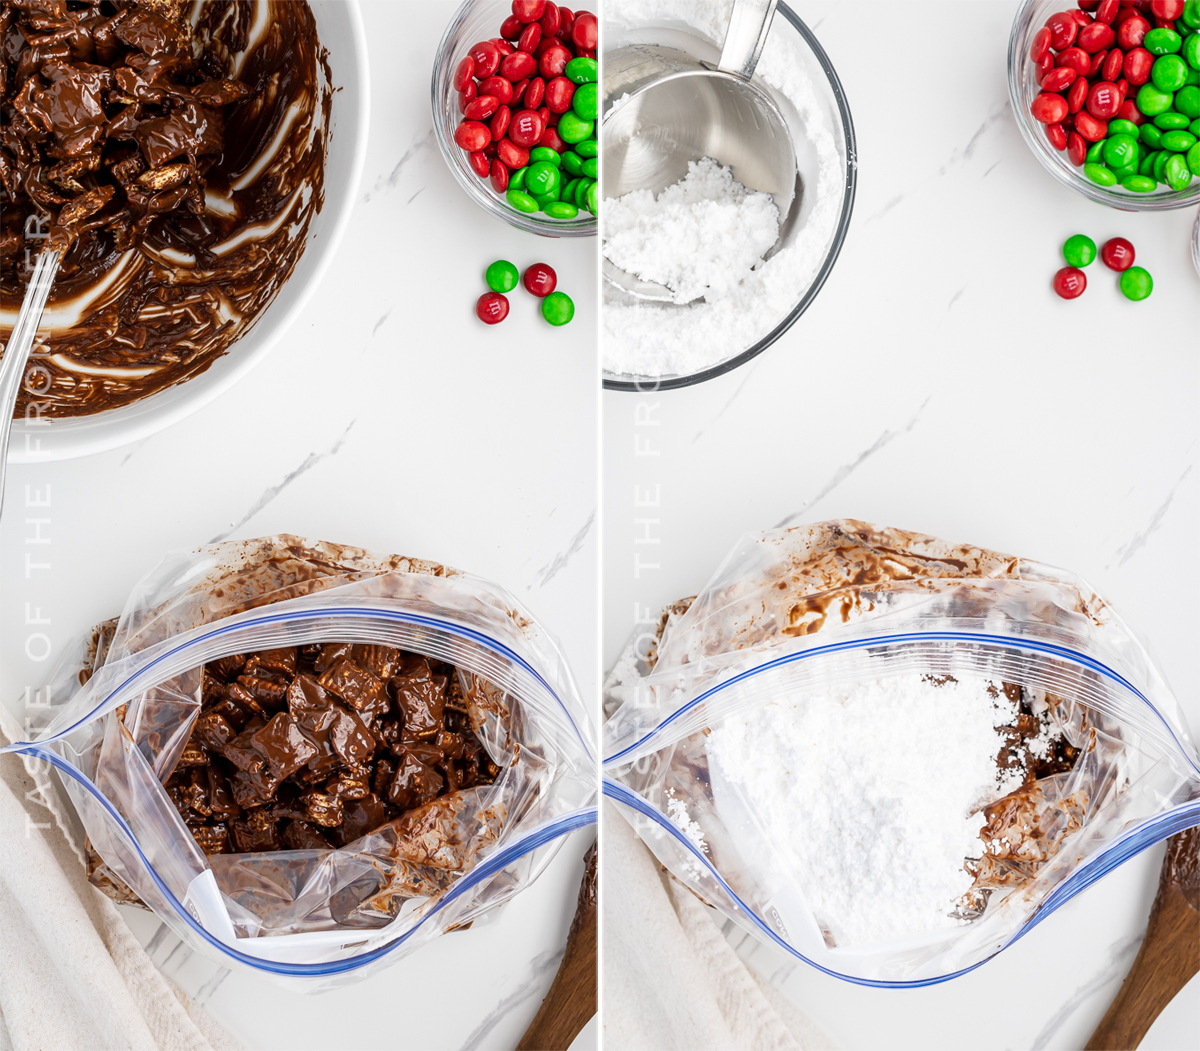 How to coat with chocolate and sugar